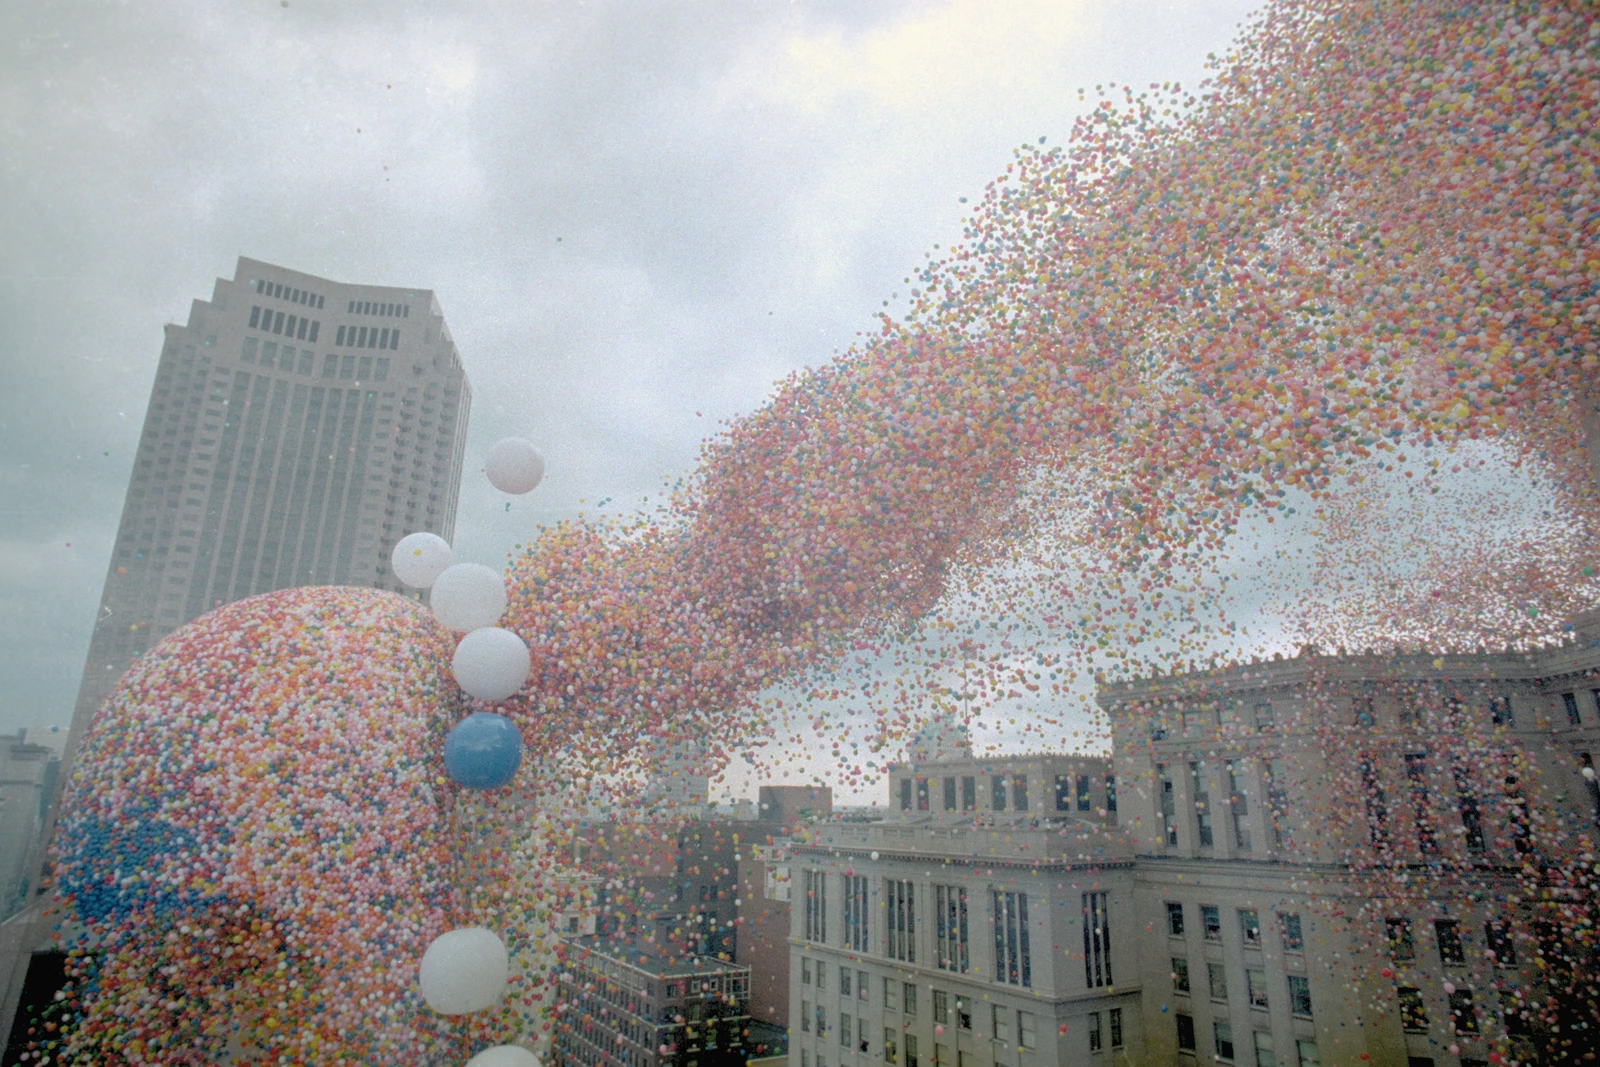 How Clevelands Balloonfest 86 Became a Public Disaster pic